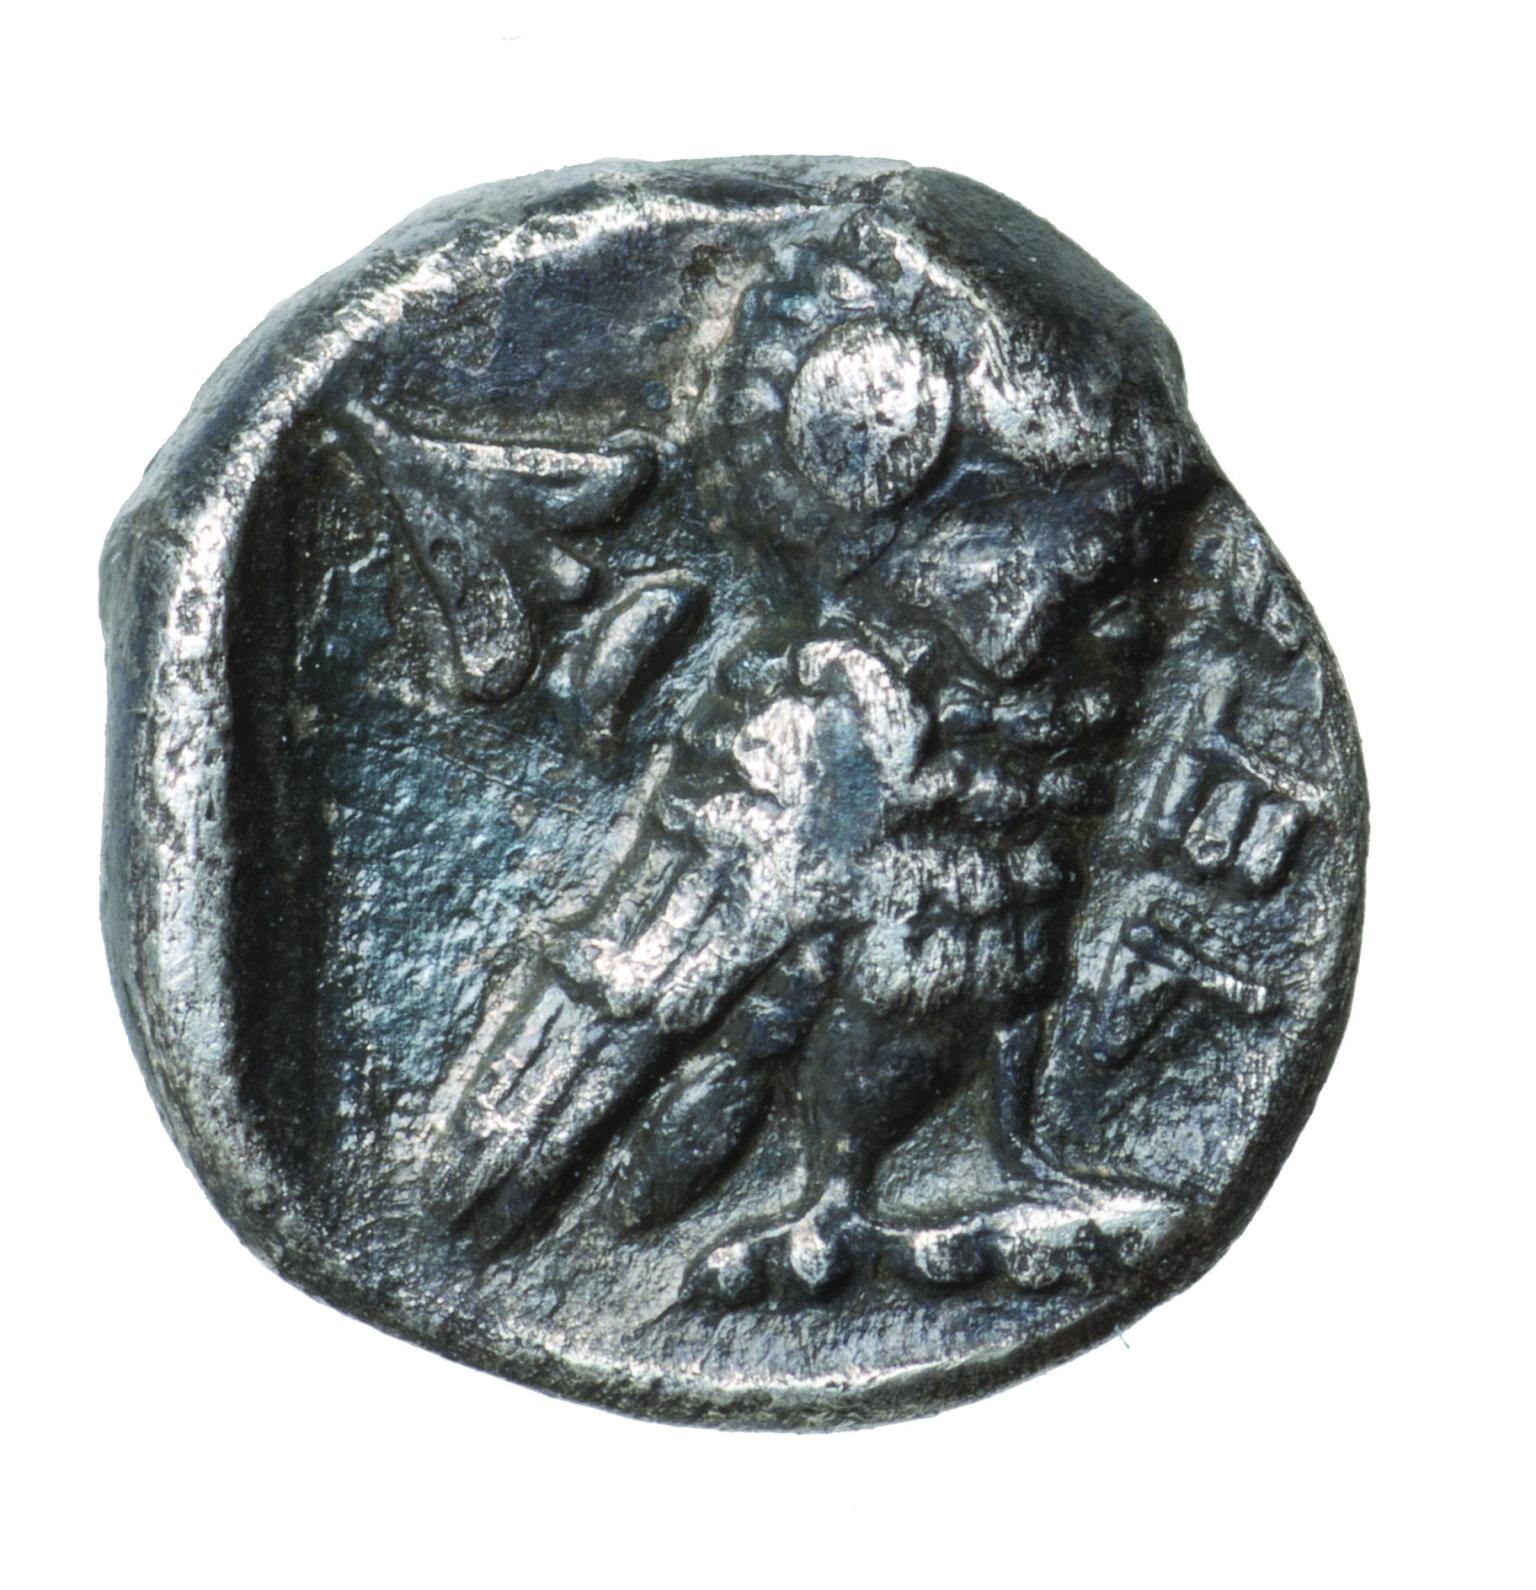 Coin with image of an owl and flora with a Hebrew inscription.